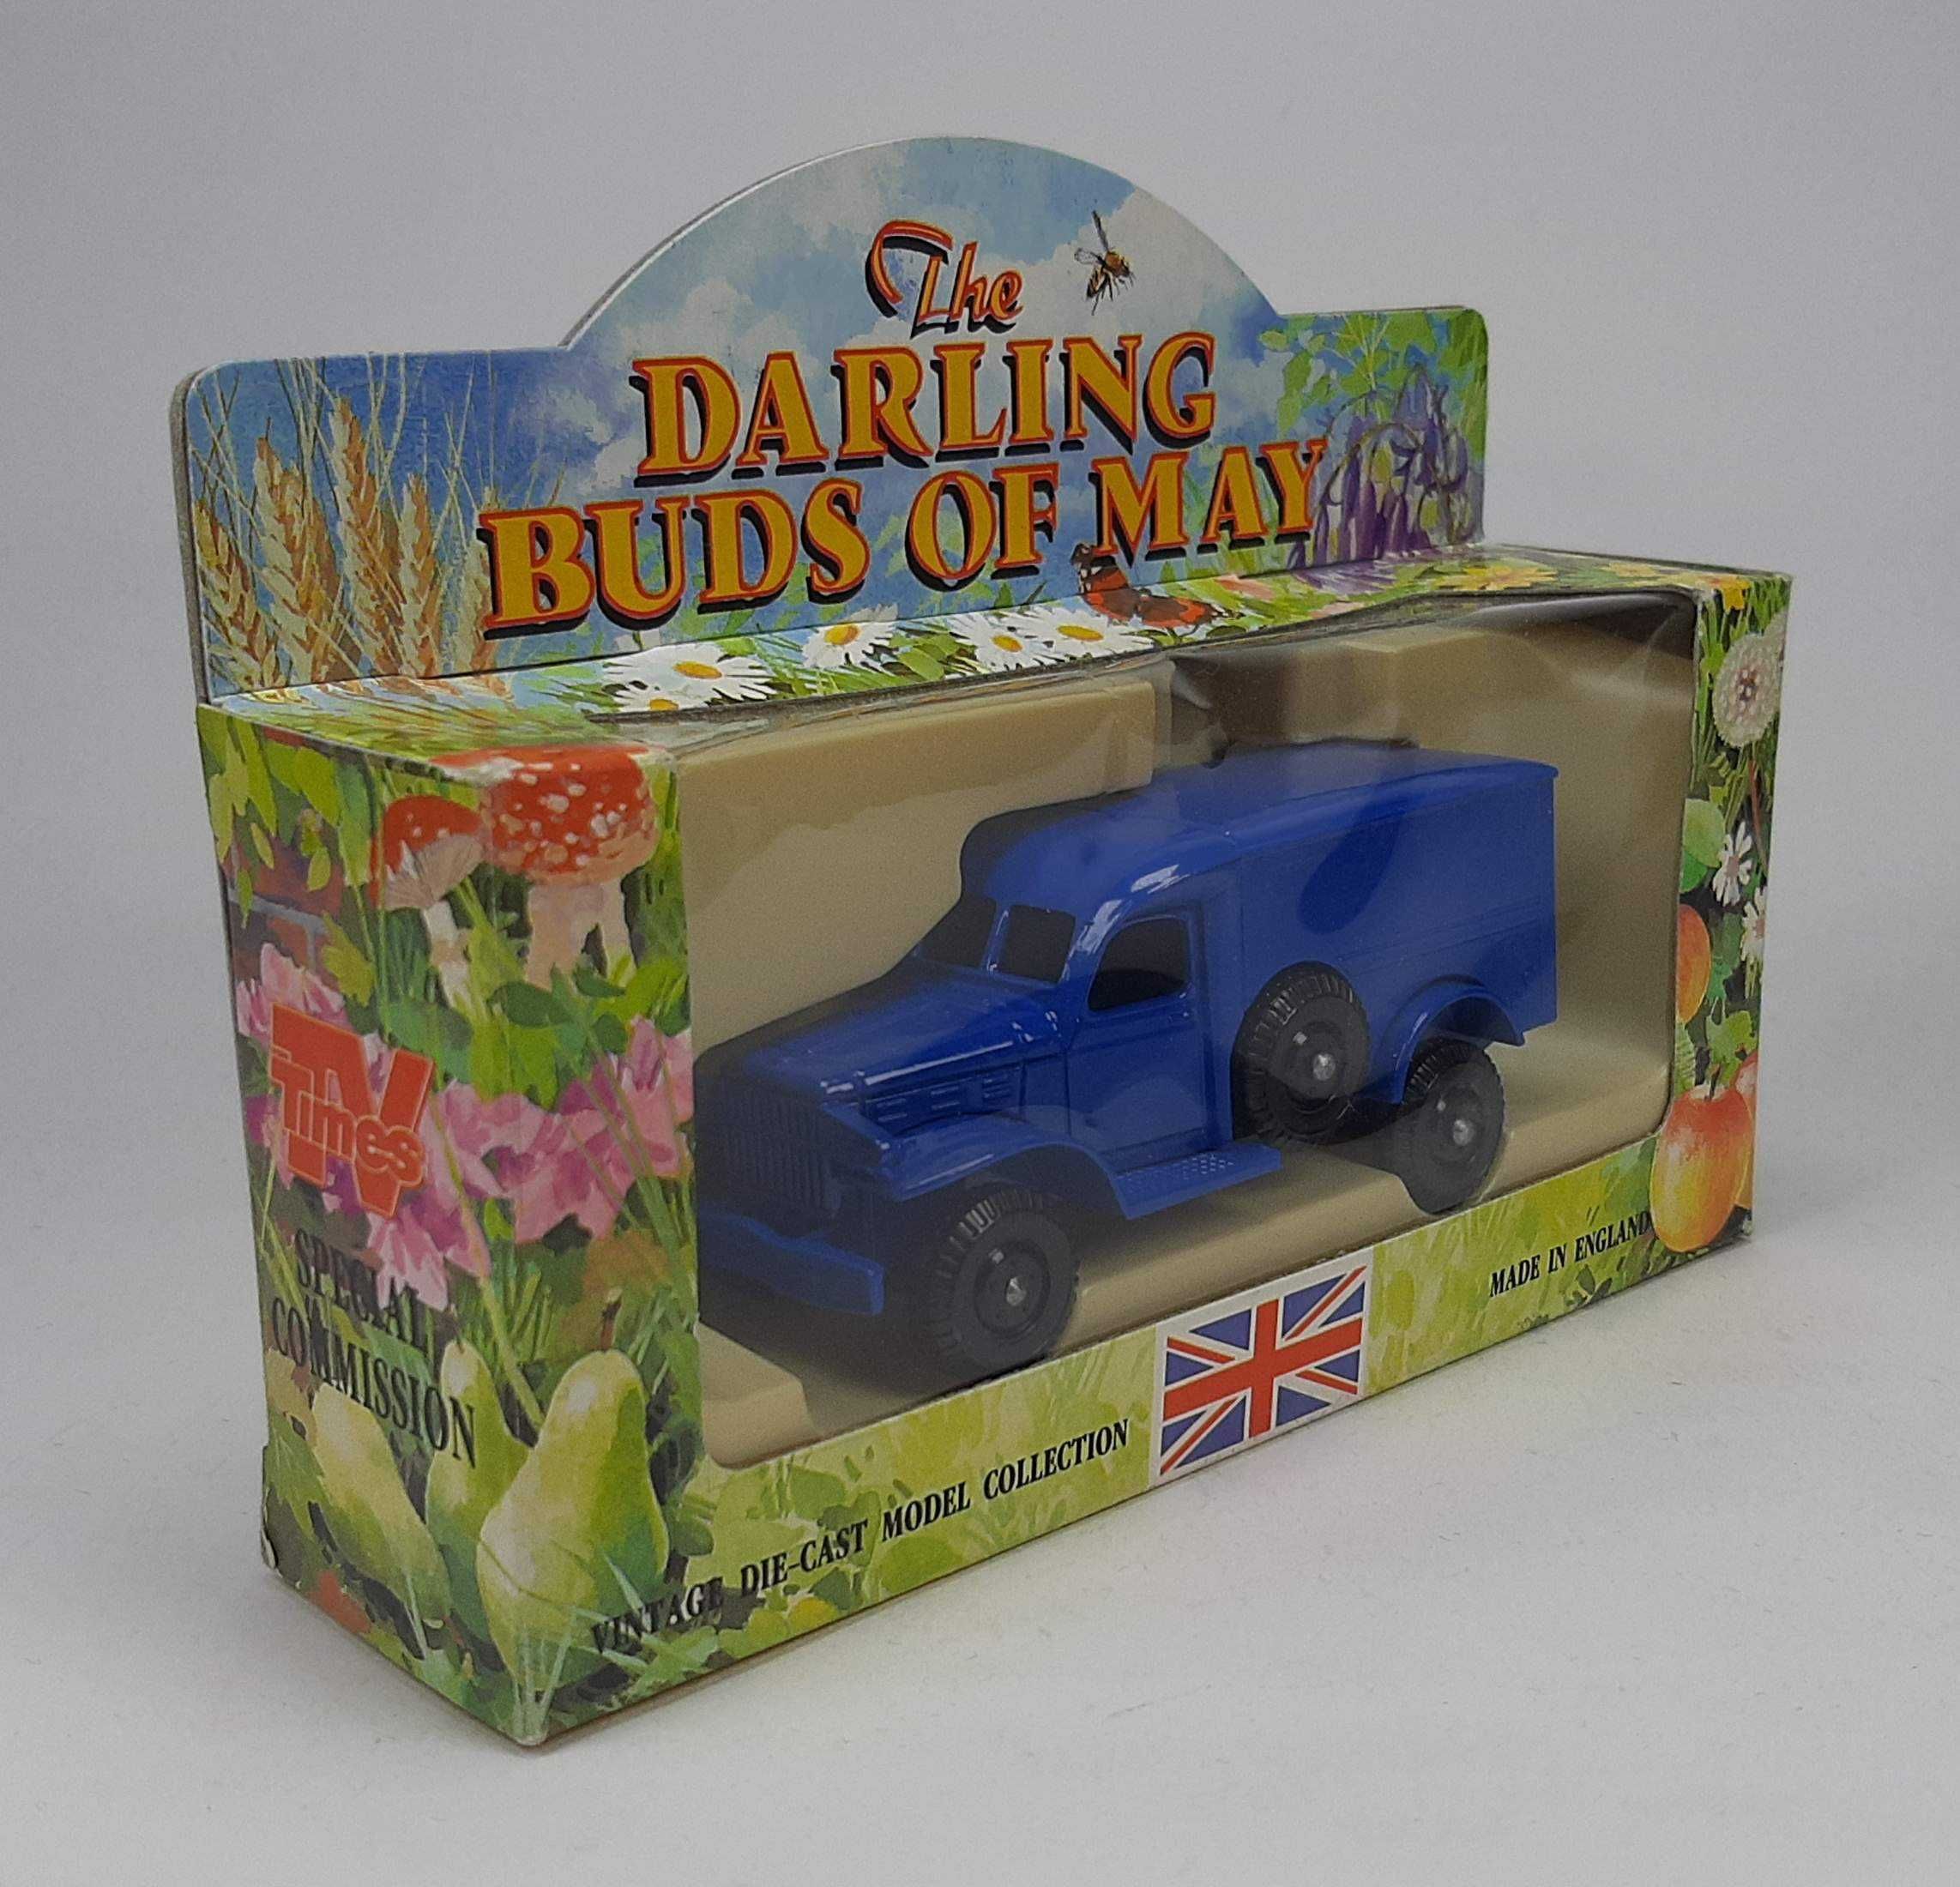 DODGE WC 54 4X4 blue "The Darling Buds of May" - LLEDO DG-29 England